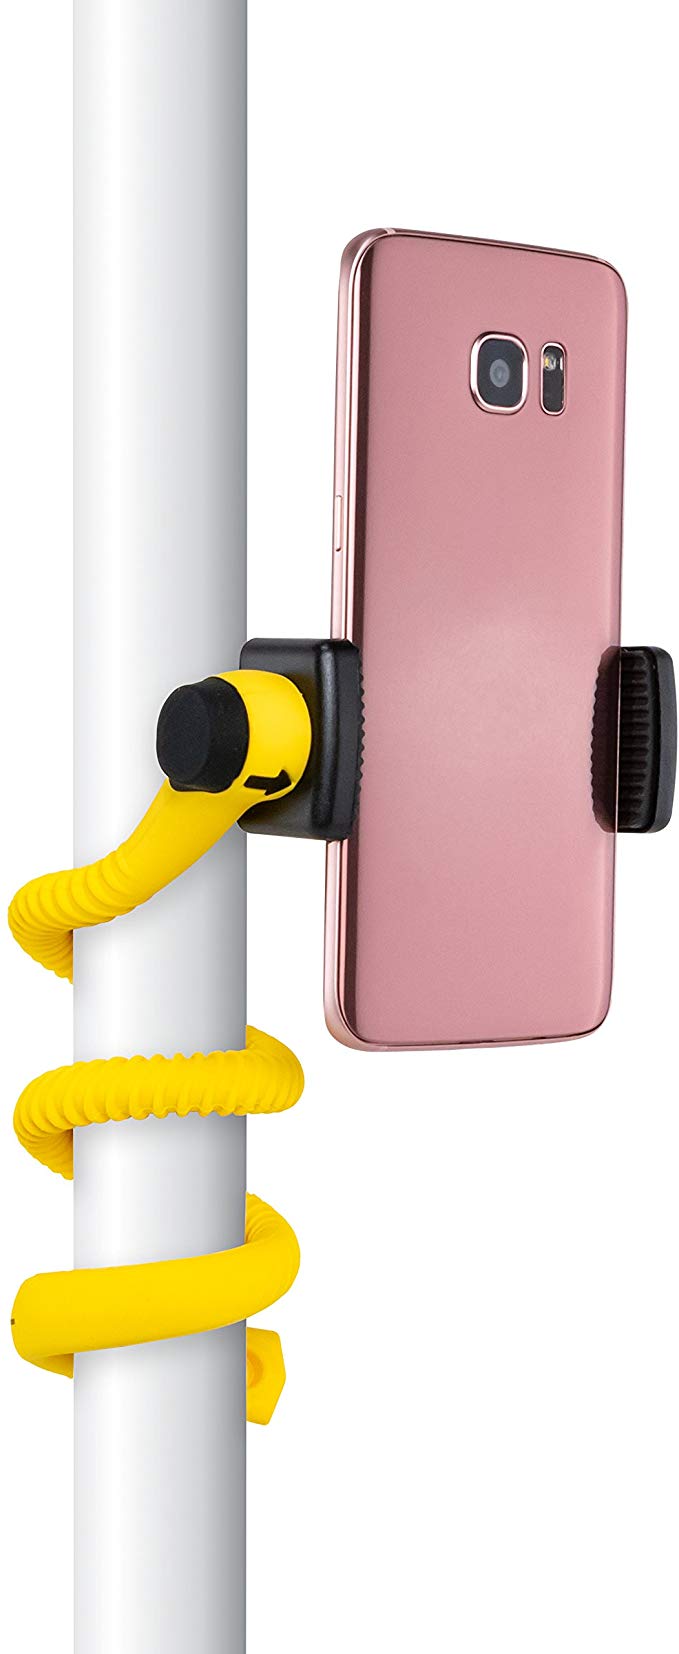 Gekkostick Flexible Smartphone Selfie Stick - Portable Selfie Stick That can be Set, Wrapped, Hung and Clung Practically Anywhere - Universal fit for Smartphones (Yellow) 32047